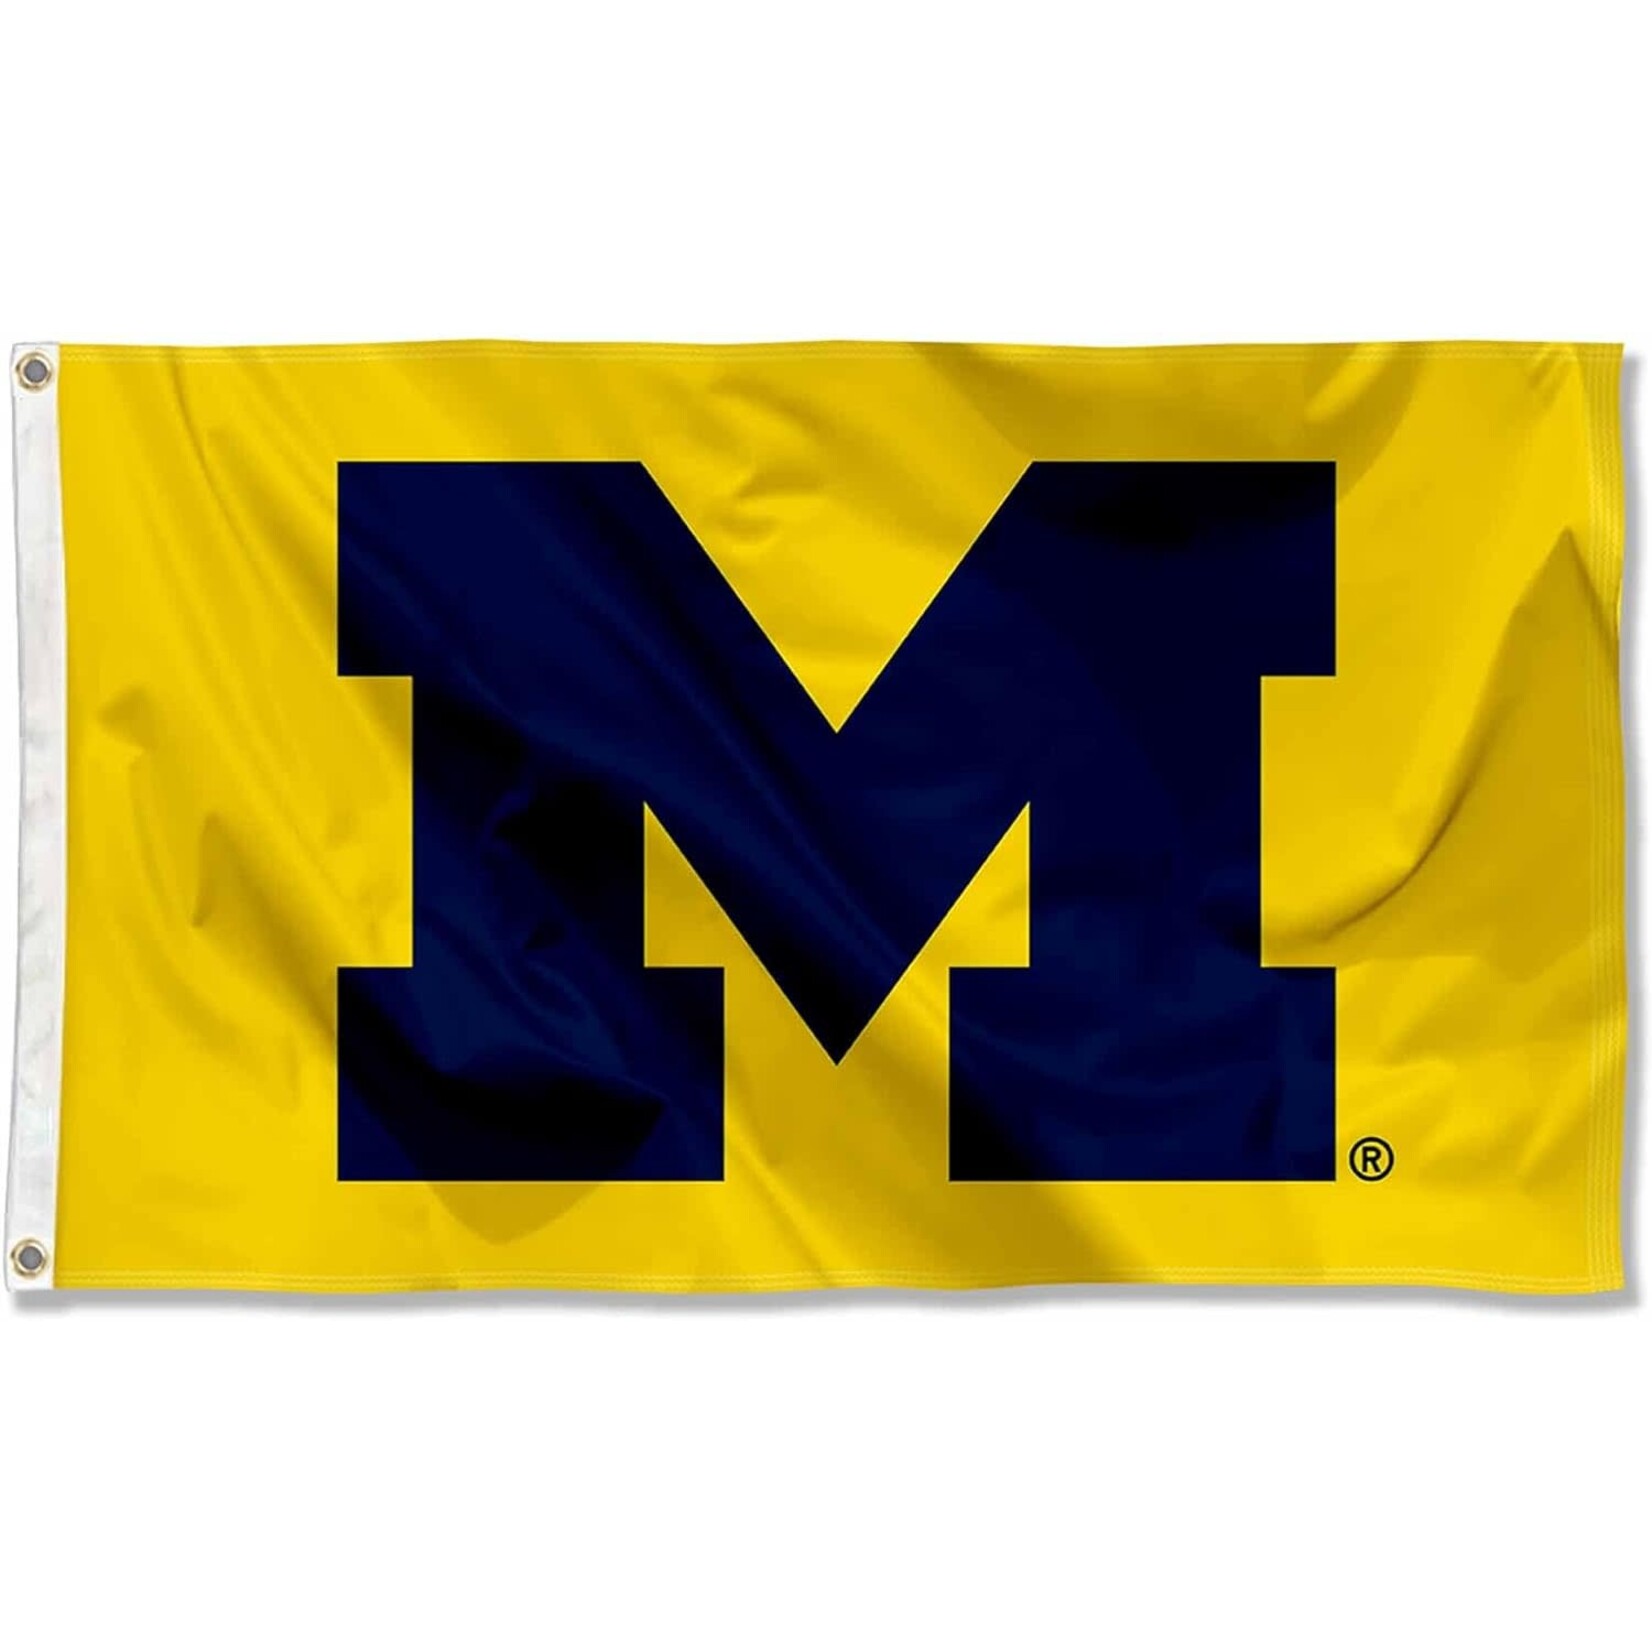 Sewing Concepts Michigan Wolverines Flag 3' x 5' Gold w/ Navy M